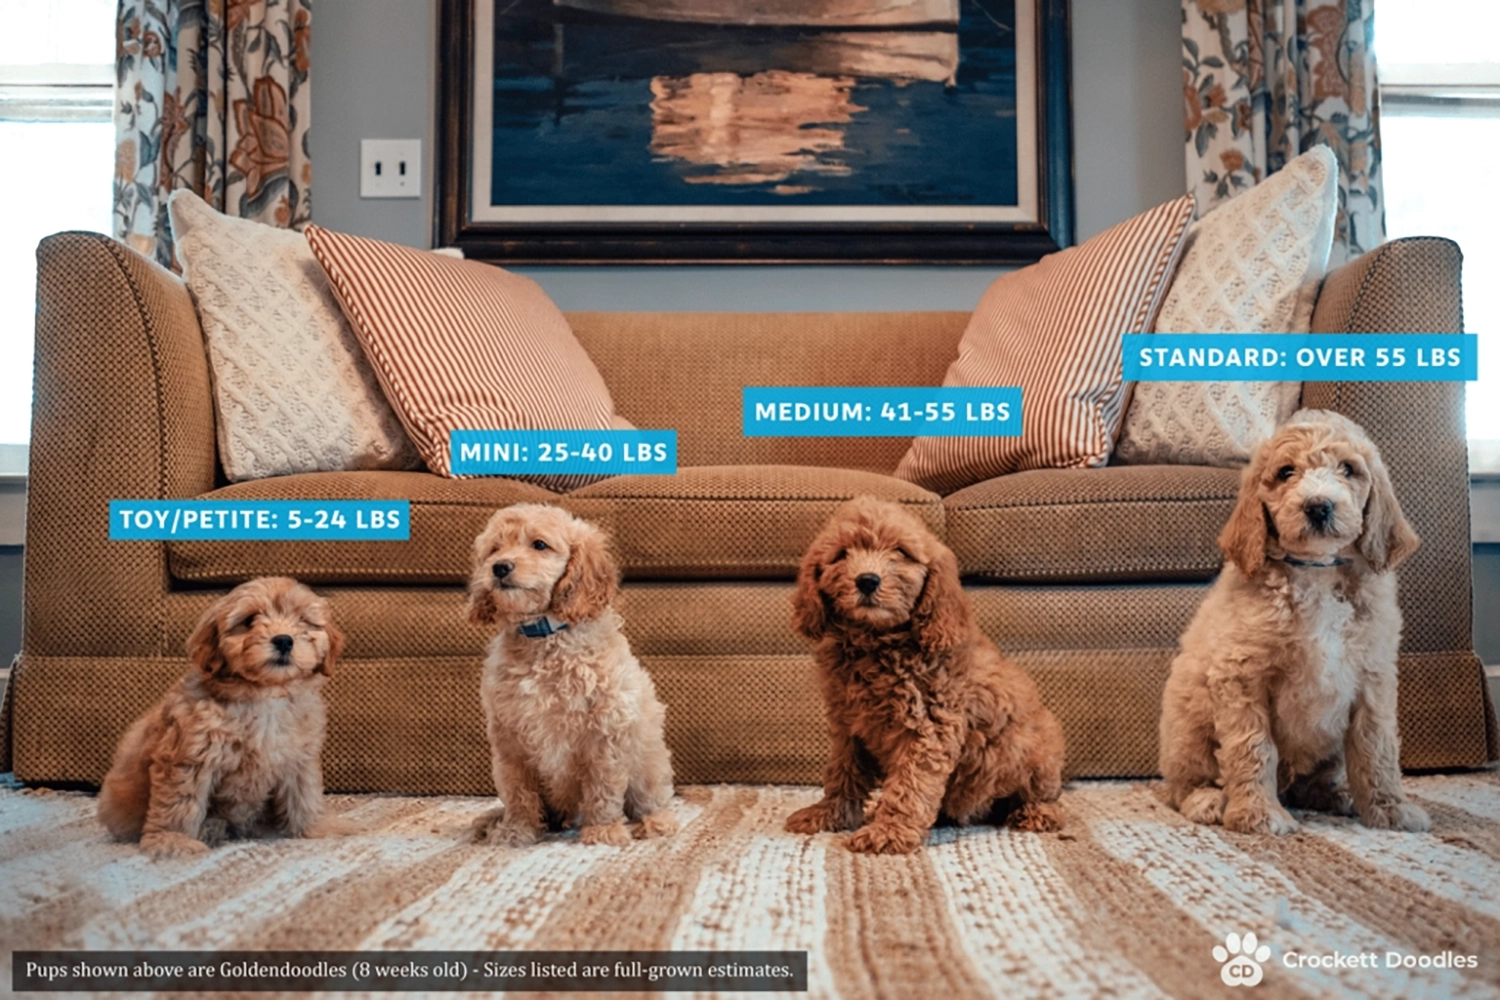 Four Goldendoodles in each size class sitting in front of sofa.